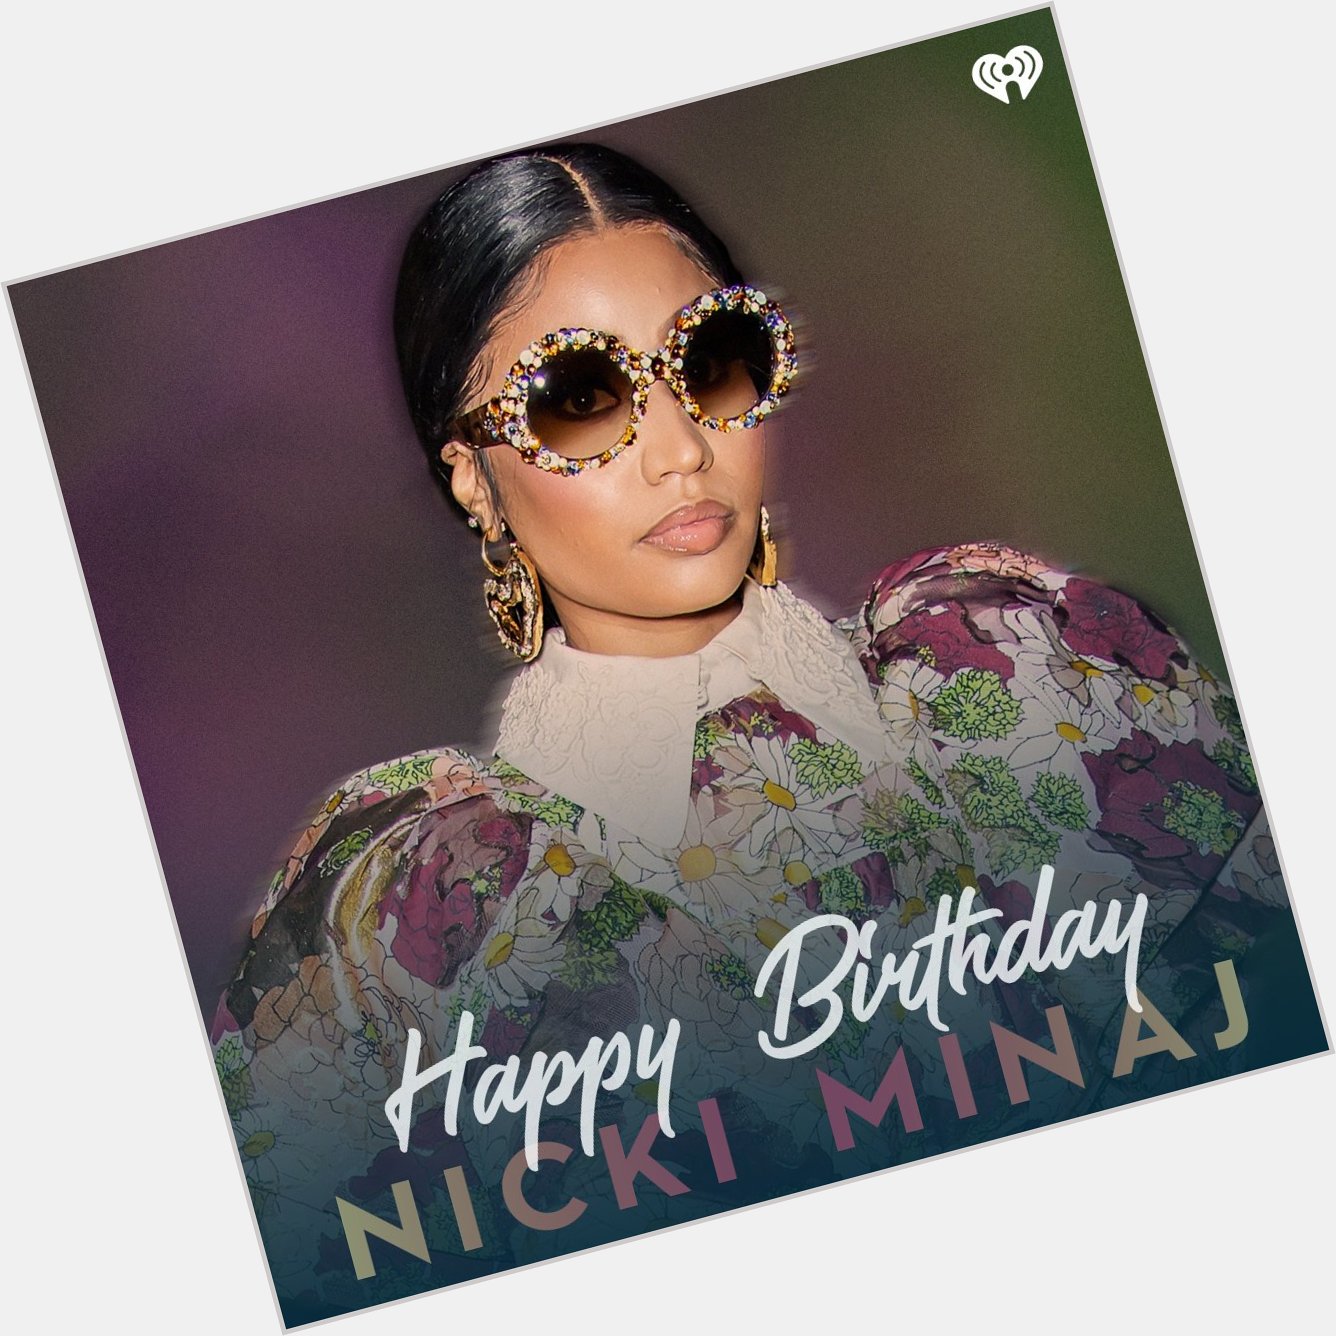 We\re here to wish Queen Nicki a Happy Birthday! Stream radio ALL DAY LONG:  